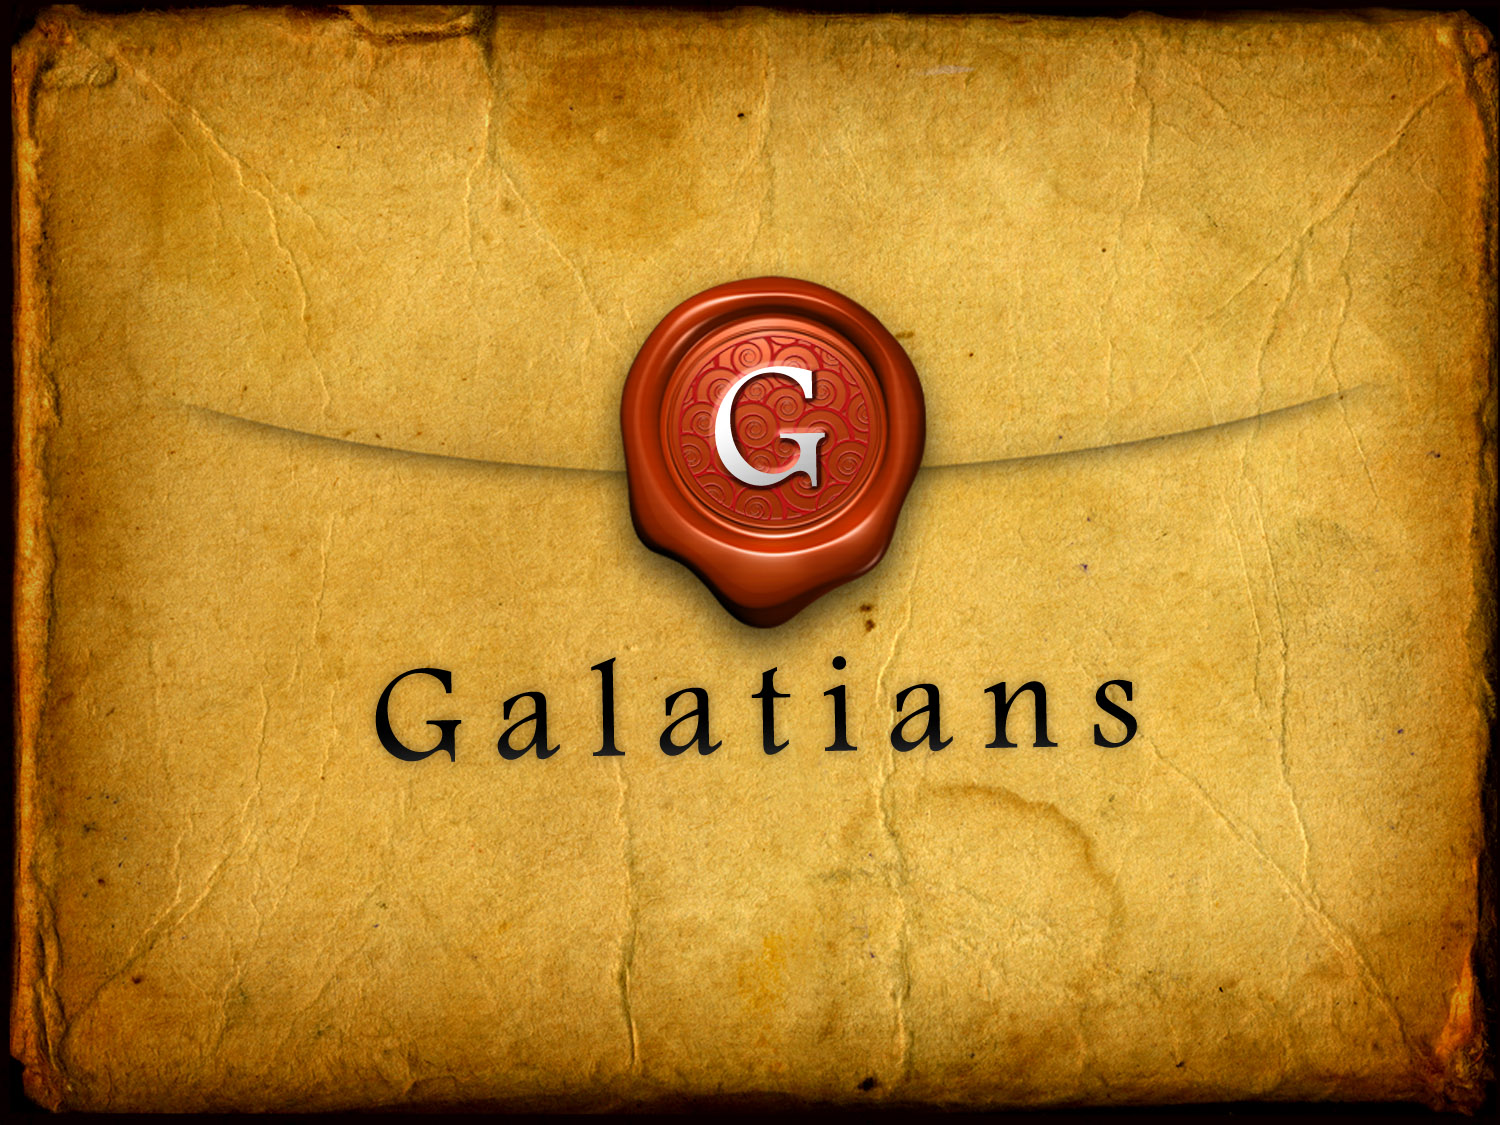 The Book of Galatians 5:1-4